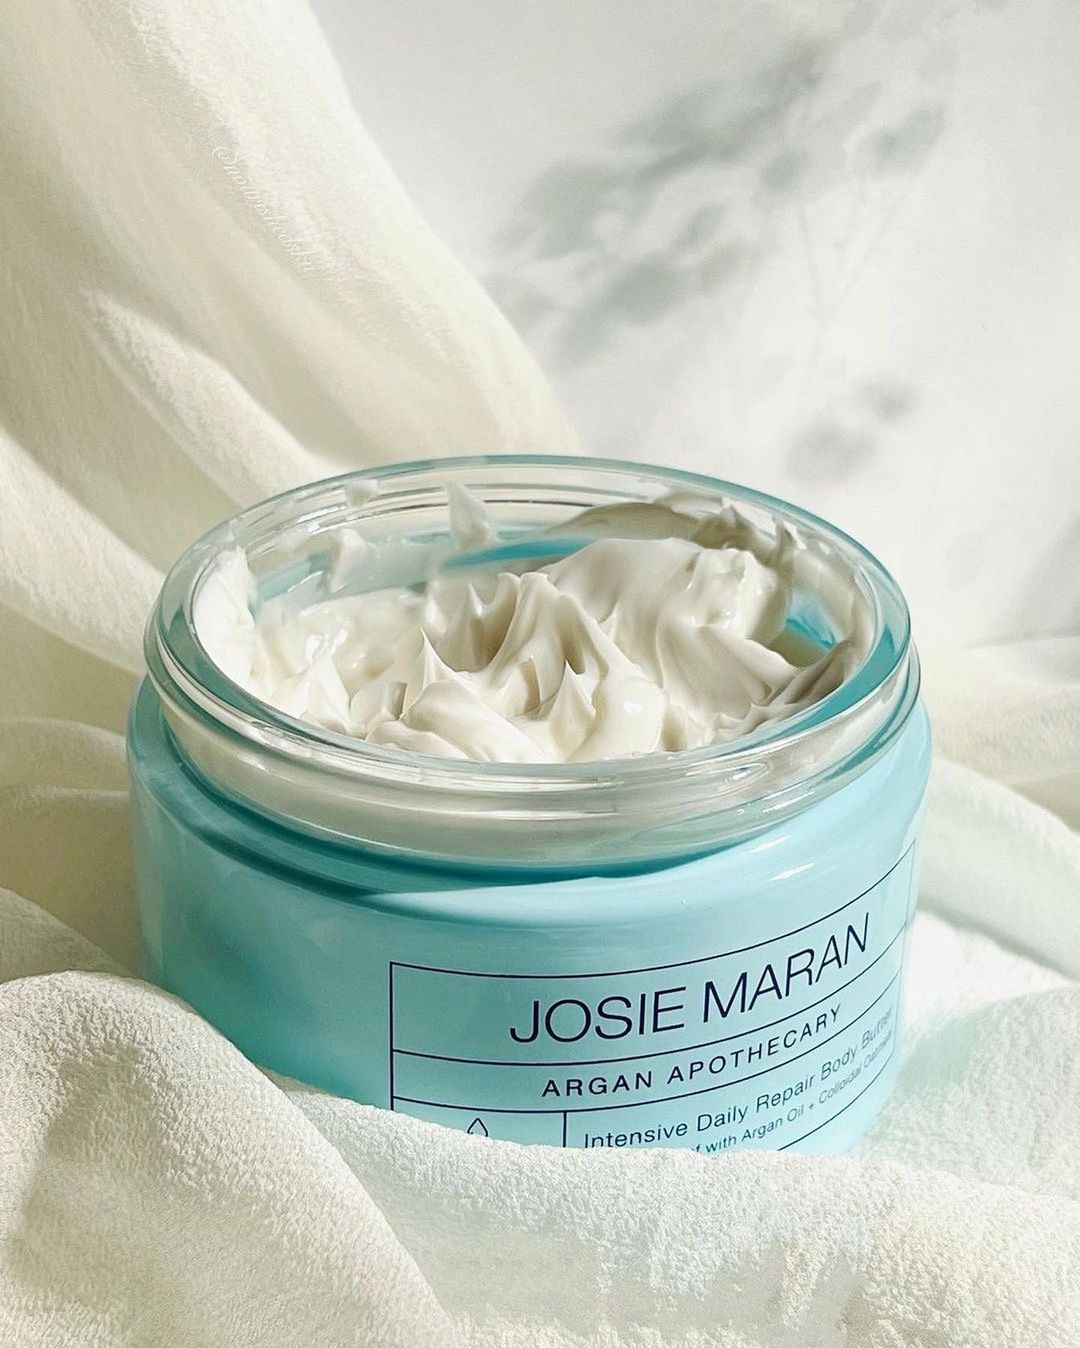 Josie Maran body butter in container on sheet